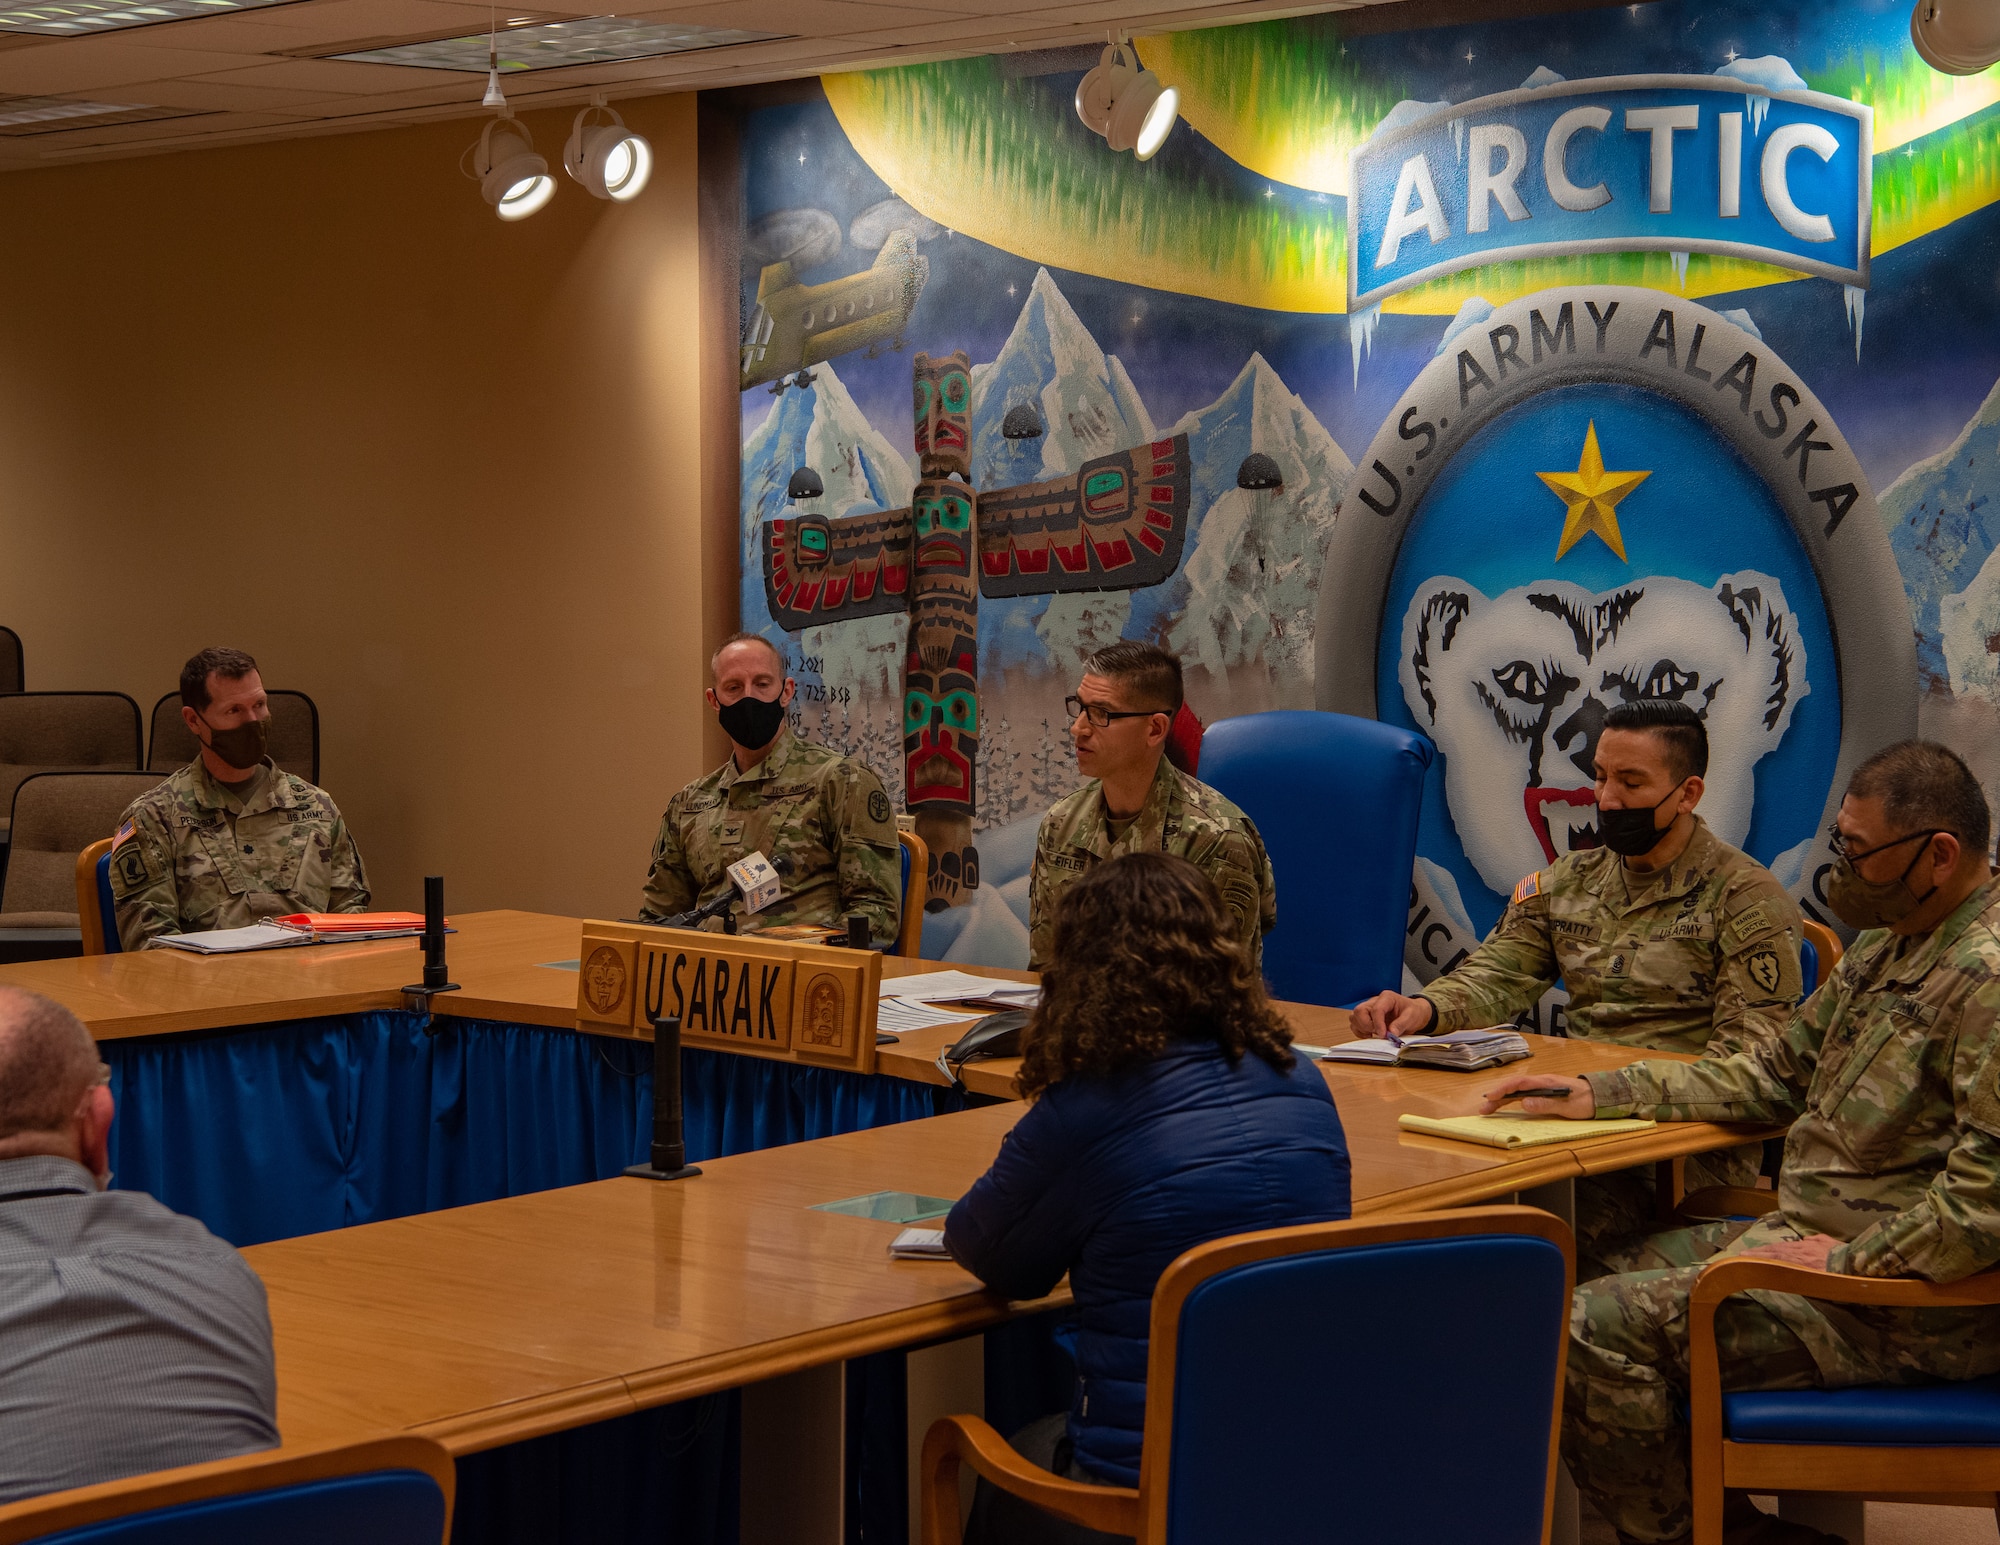 U.S. Army Alaska leadership and journalists from Anchorage gather for a media roundtable about combating suicide amongst Soldiers at Joint Base Elmendorf-Richardson, Alaska, Feb. 25, 2022. The roundtable provided an opportunity for the community to hear about the plans USARAK has for addressing the increase in suicide cases.